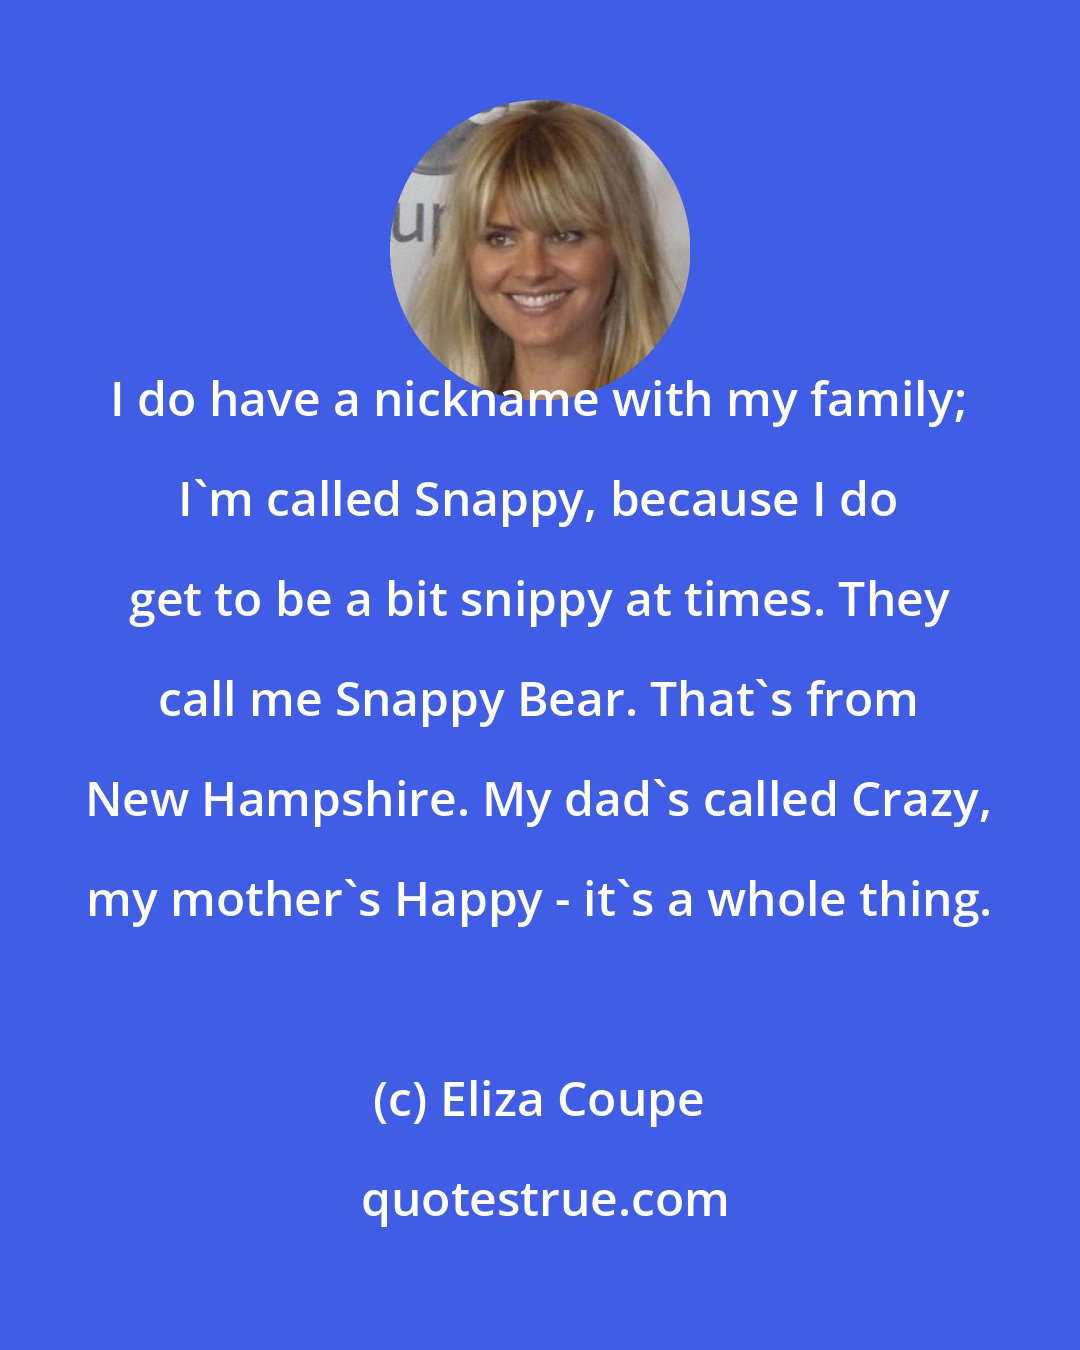 Eliza Coupe: I do have a nickname with my family; I'm called Snappy, because I do get to be a bit snippy at times. They call me Snappy Bear. That's from New Hampshire. My dad's called Crazy, my mother's Happy - it's a whole thing.